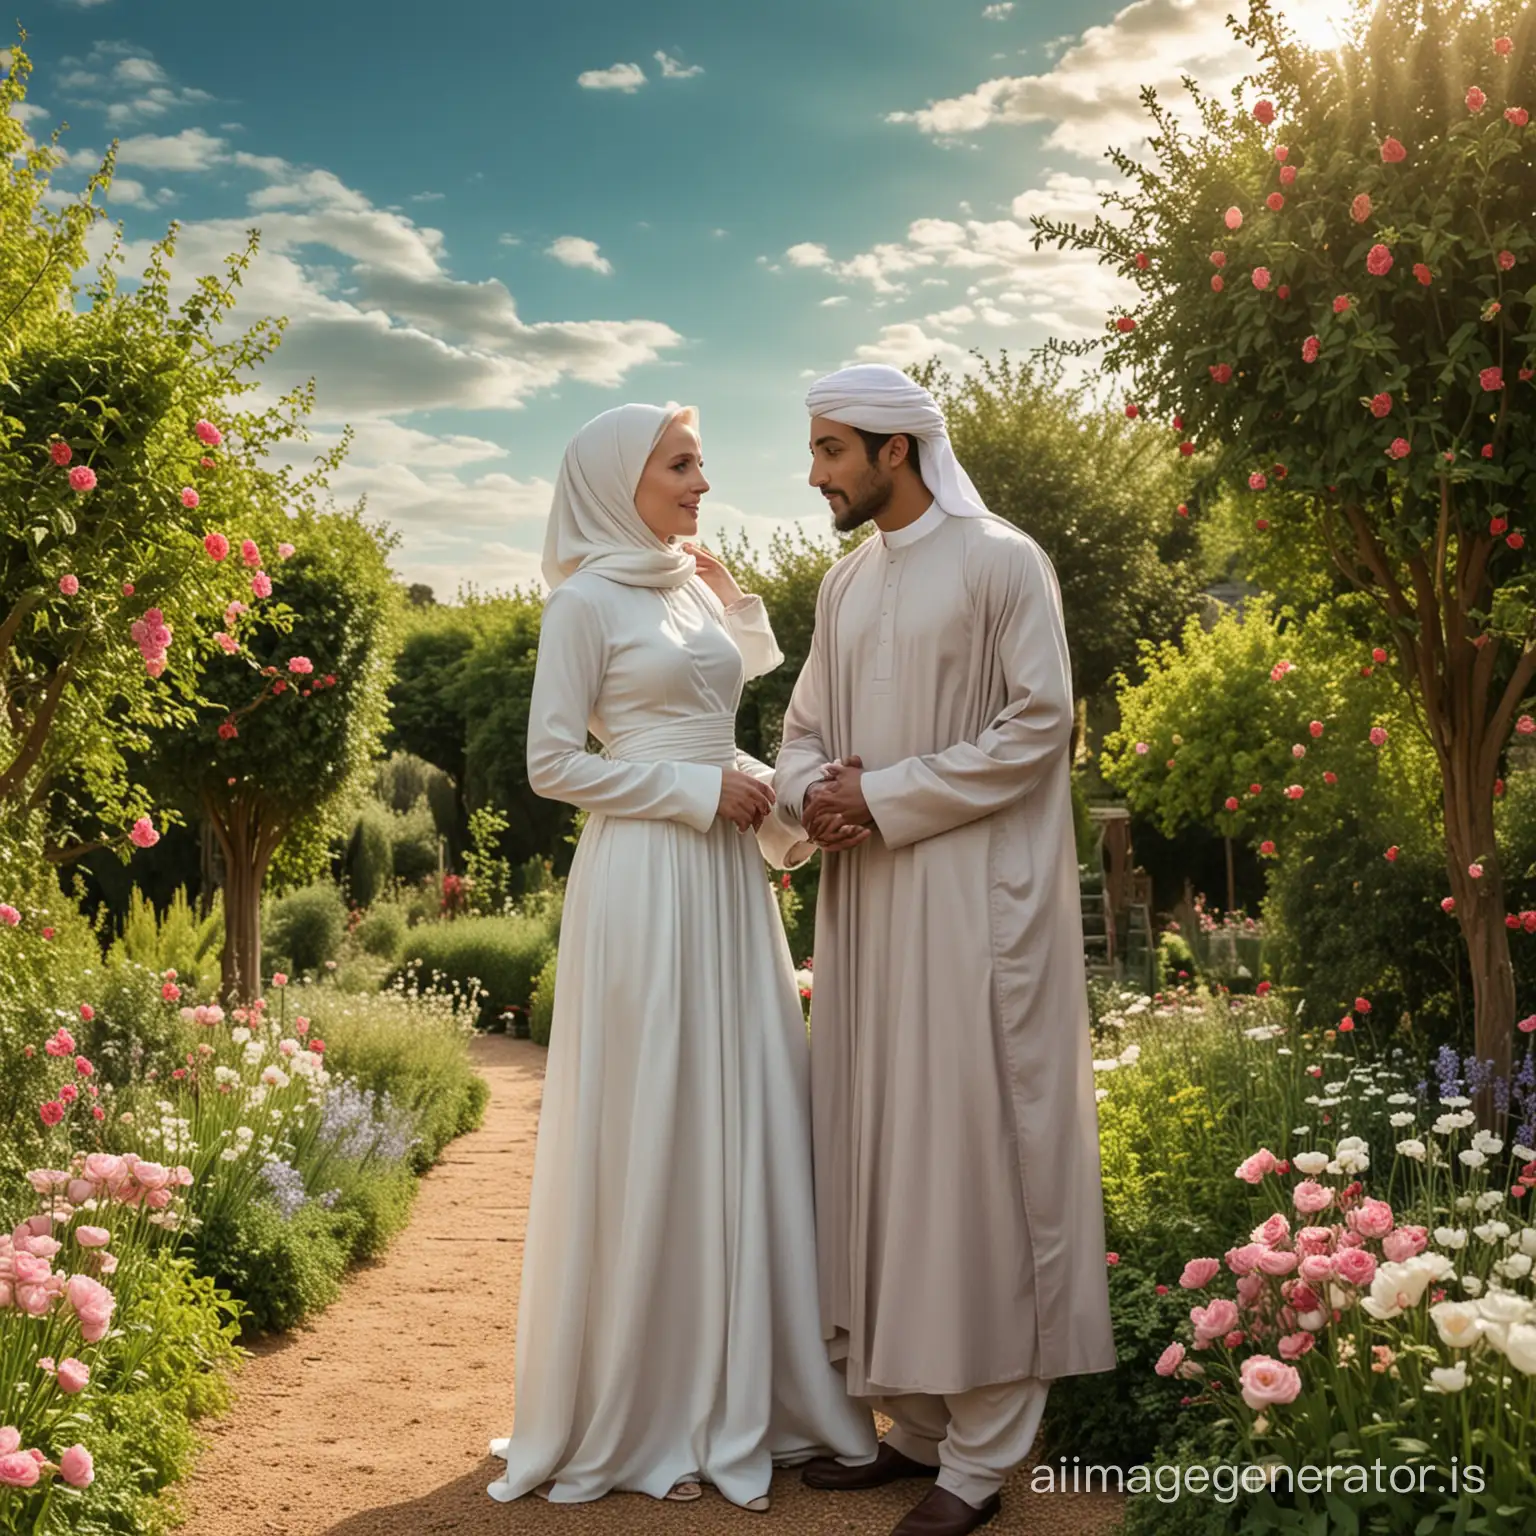 Gillian Anderson hijabi girl is standing in a garden with a beautiful Muslim boy in a hijab and there is an arc in the sky.